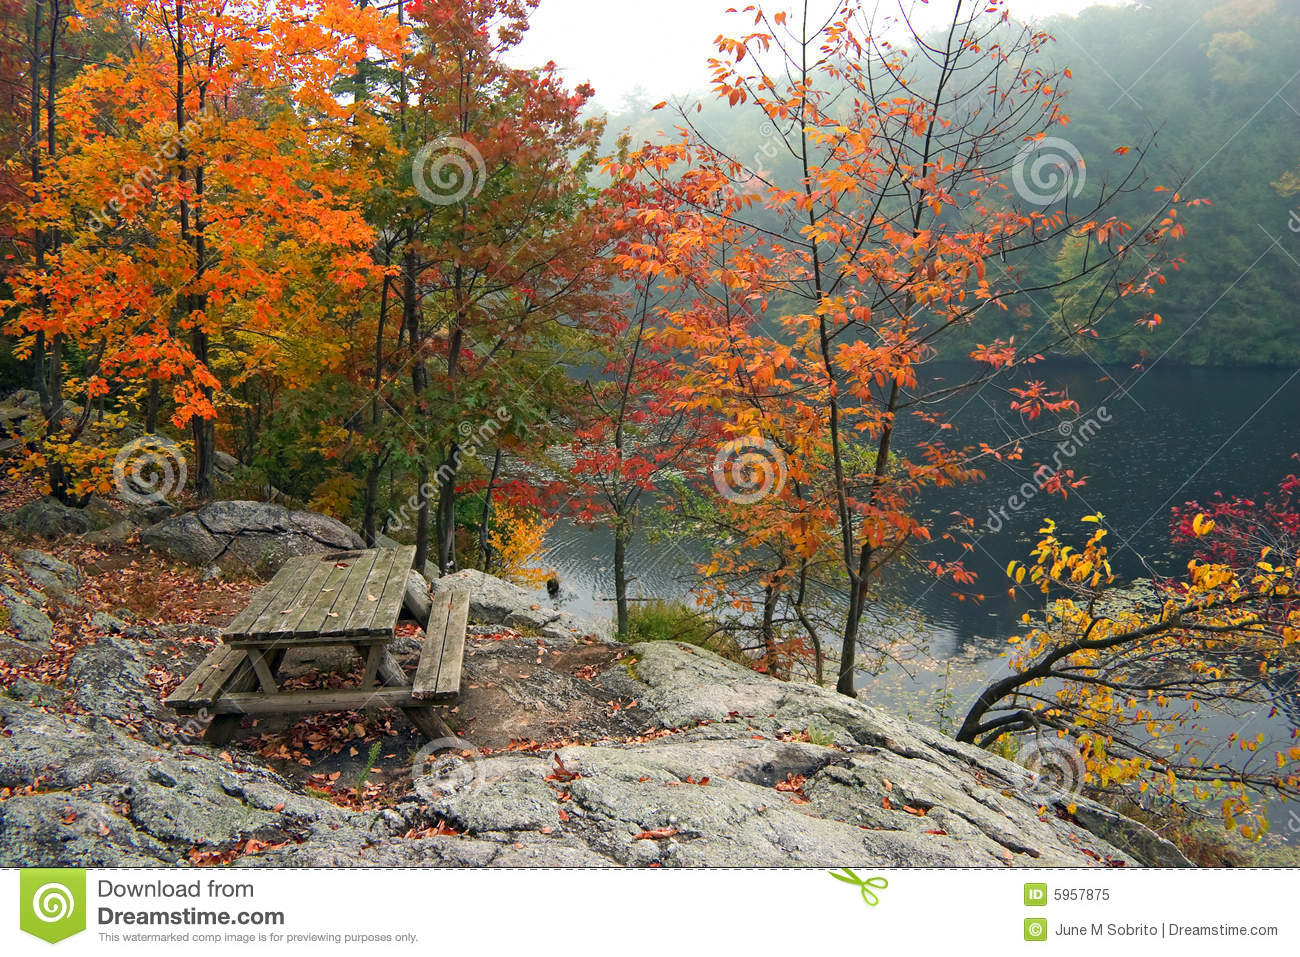 Picnic Table In Fall Royalty Free Stock Photo   Image  5957875